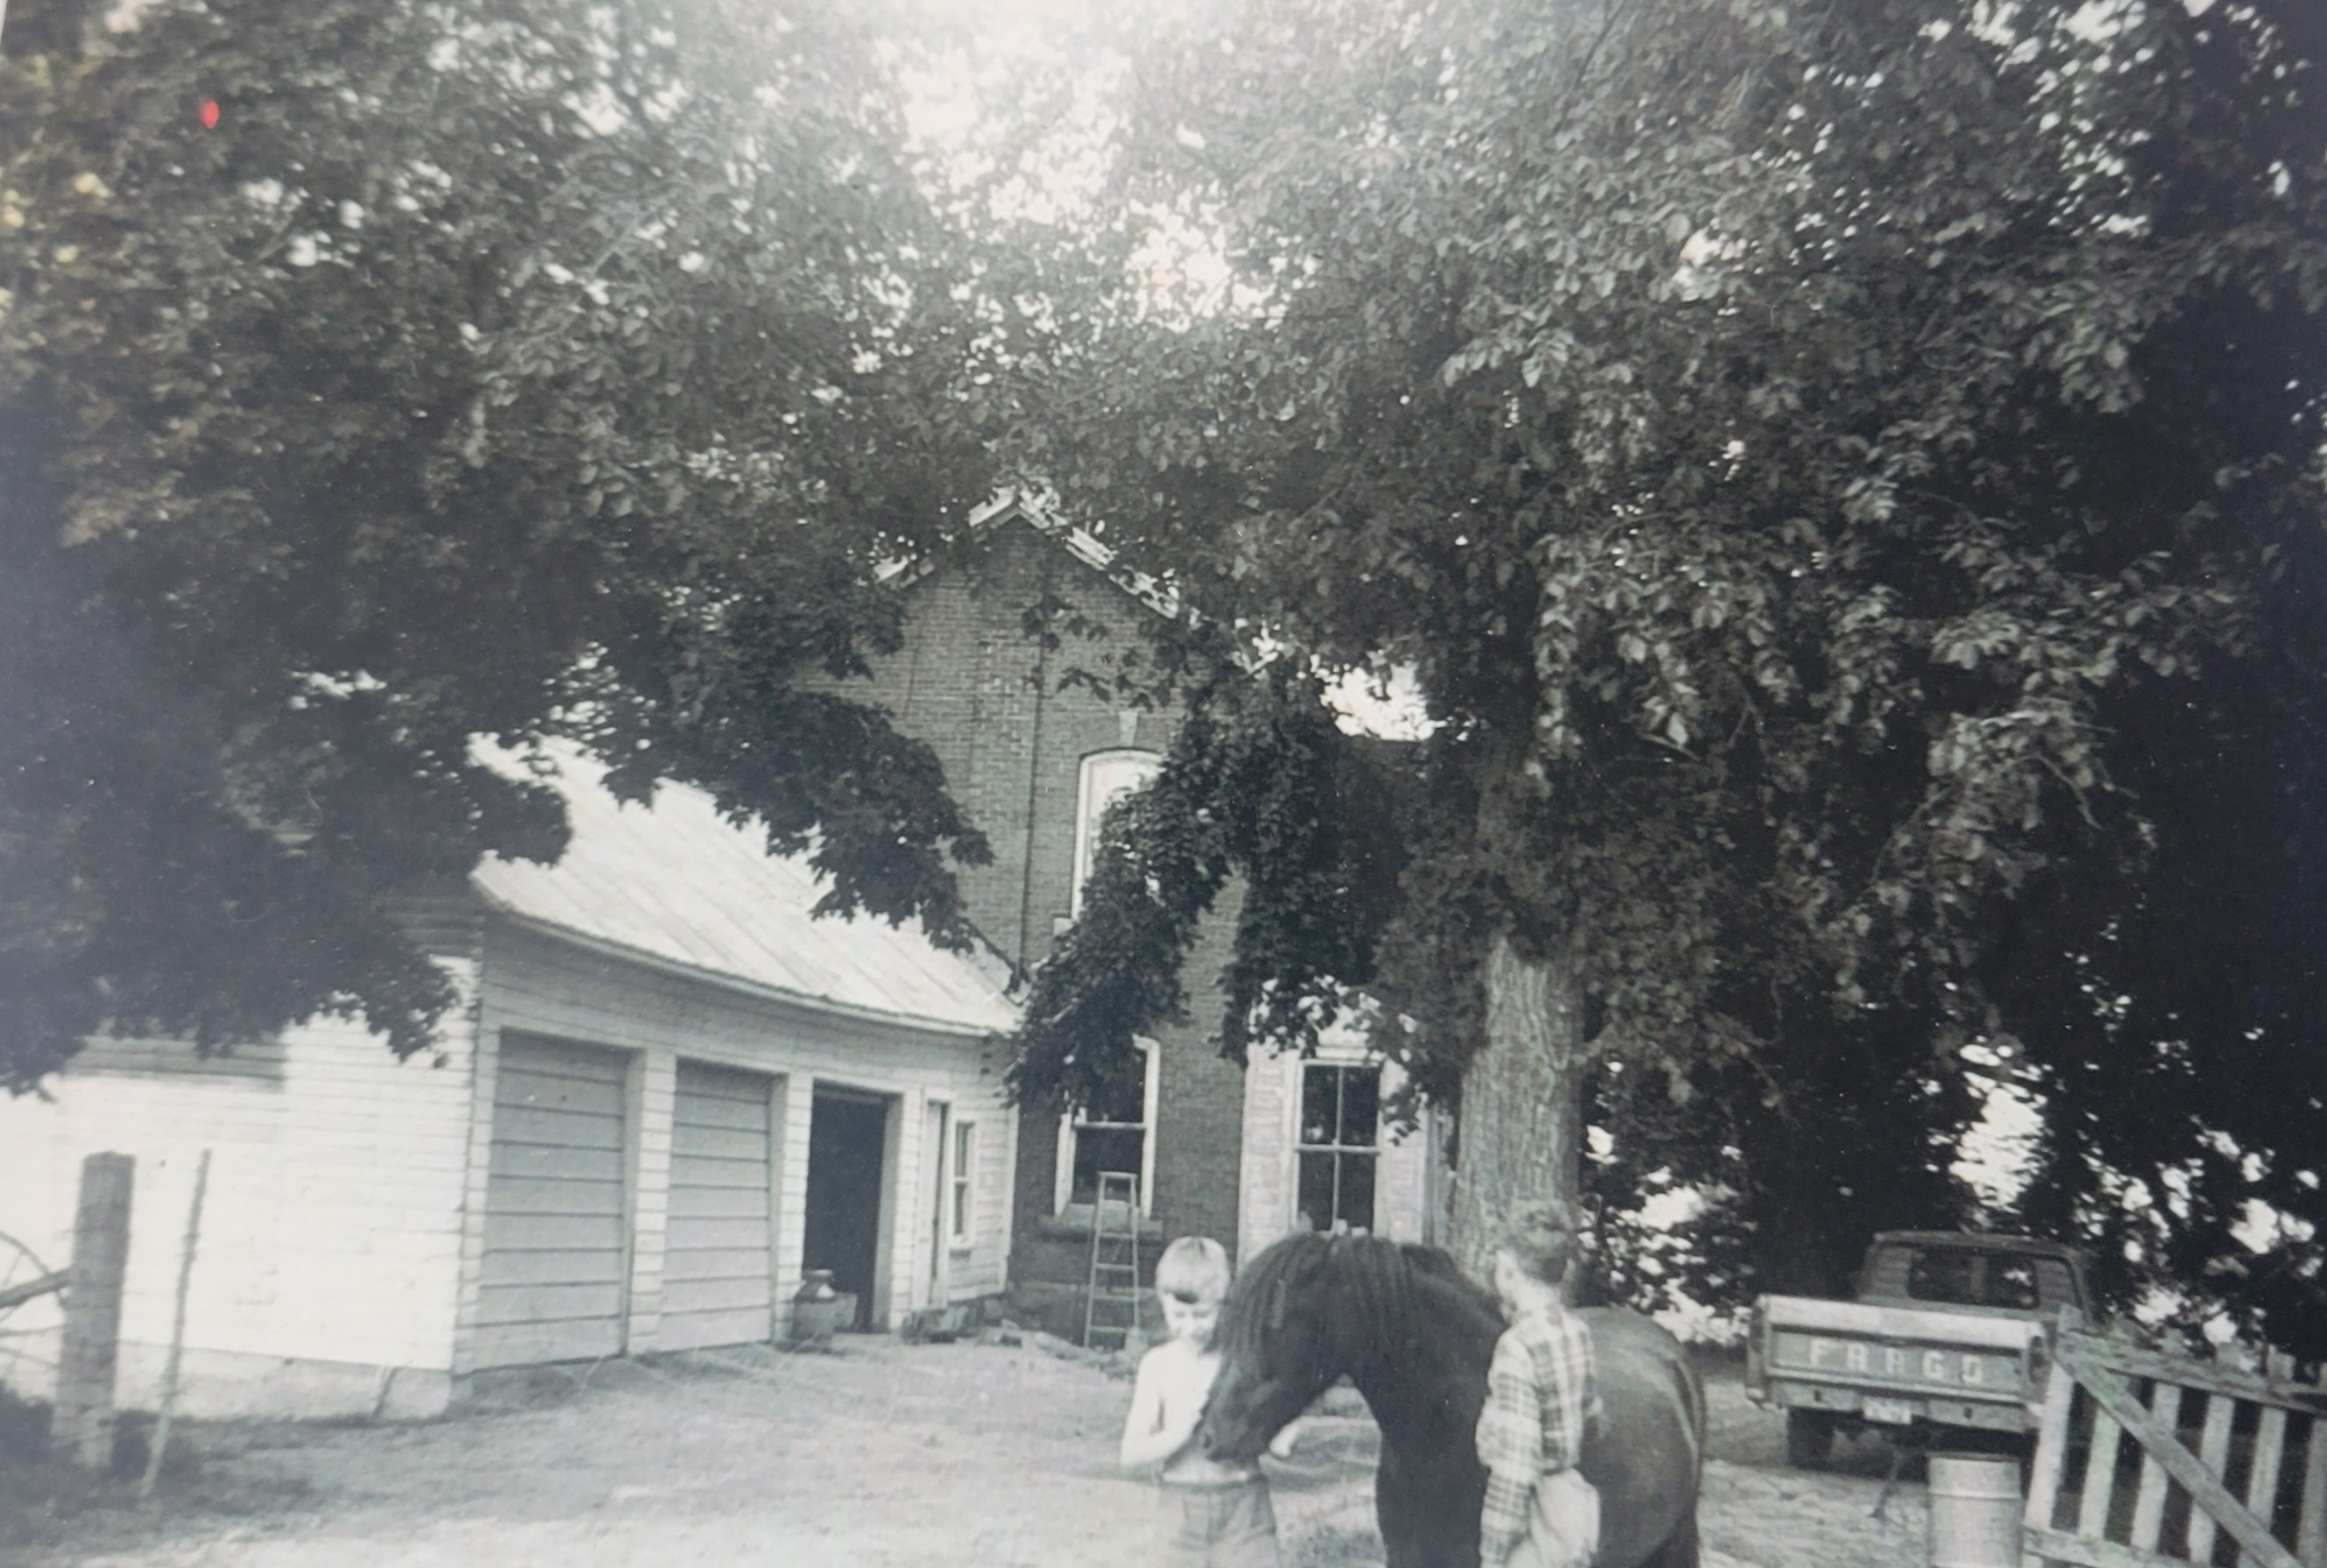 Black and white photo of the farm, two boys, and a horse